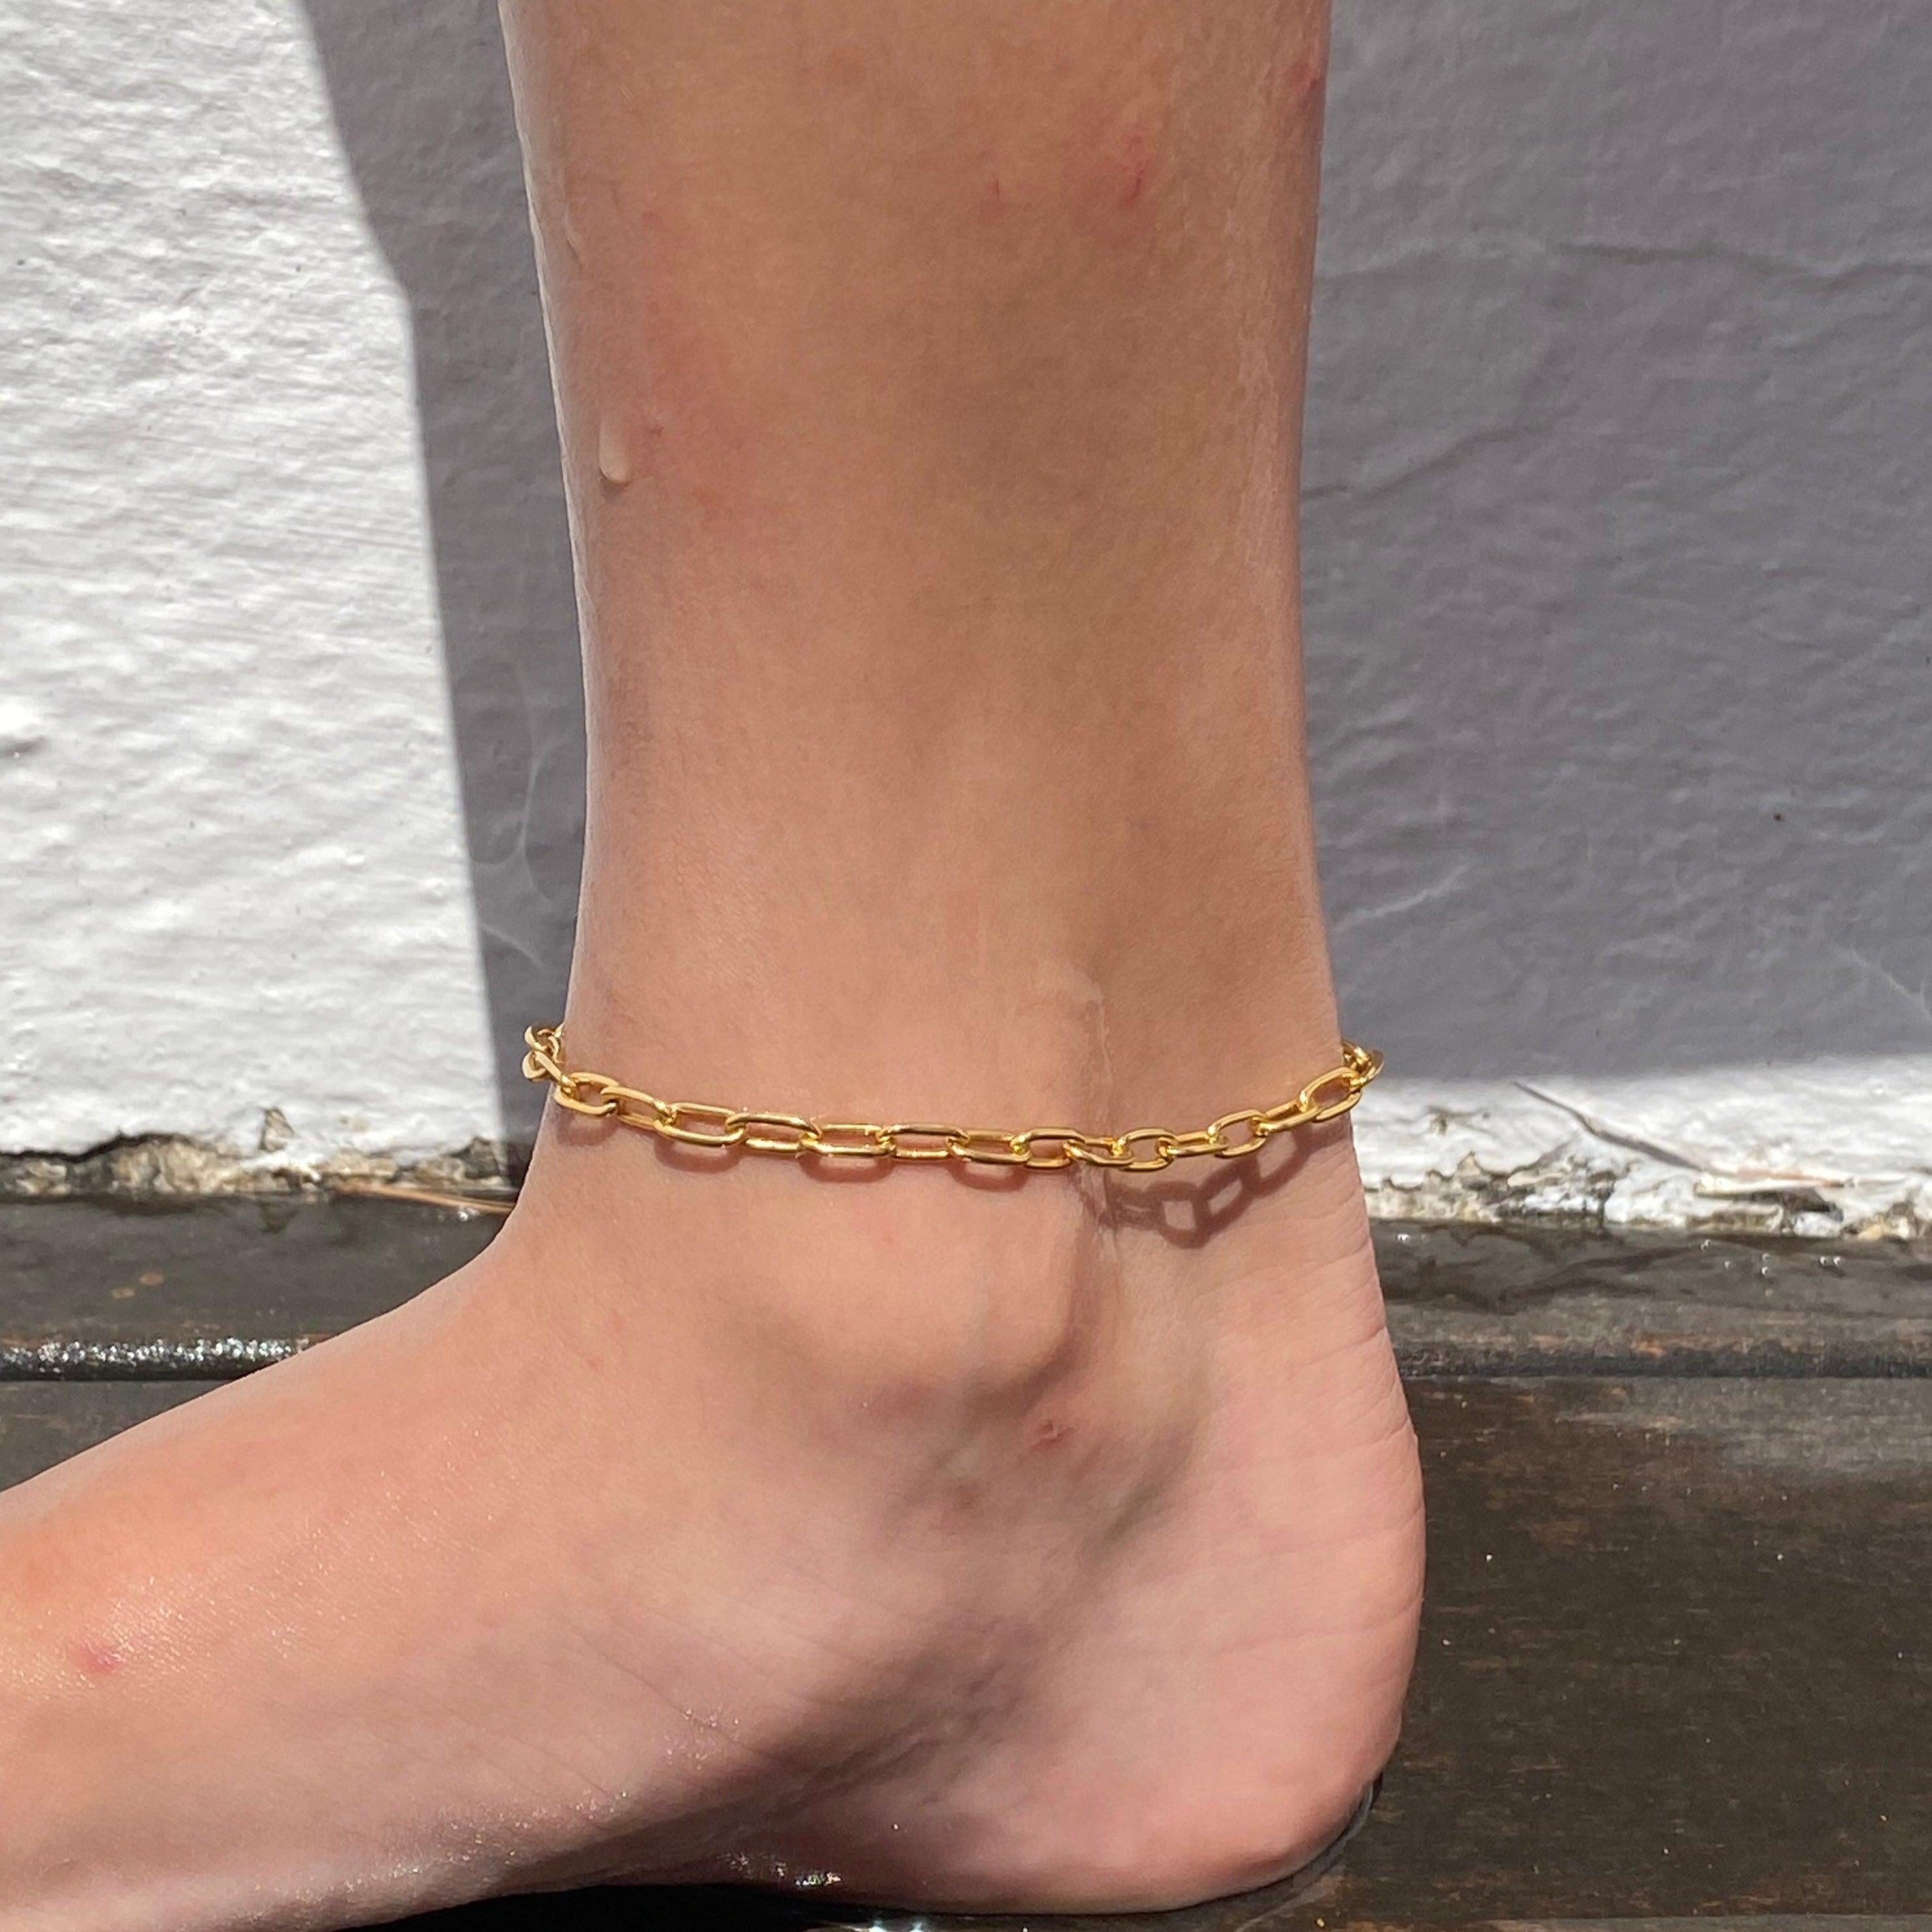 14k Solid gold ankle bracelet with little pendant for Sale in Cave Creek  AZ  OfferUp